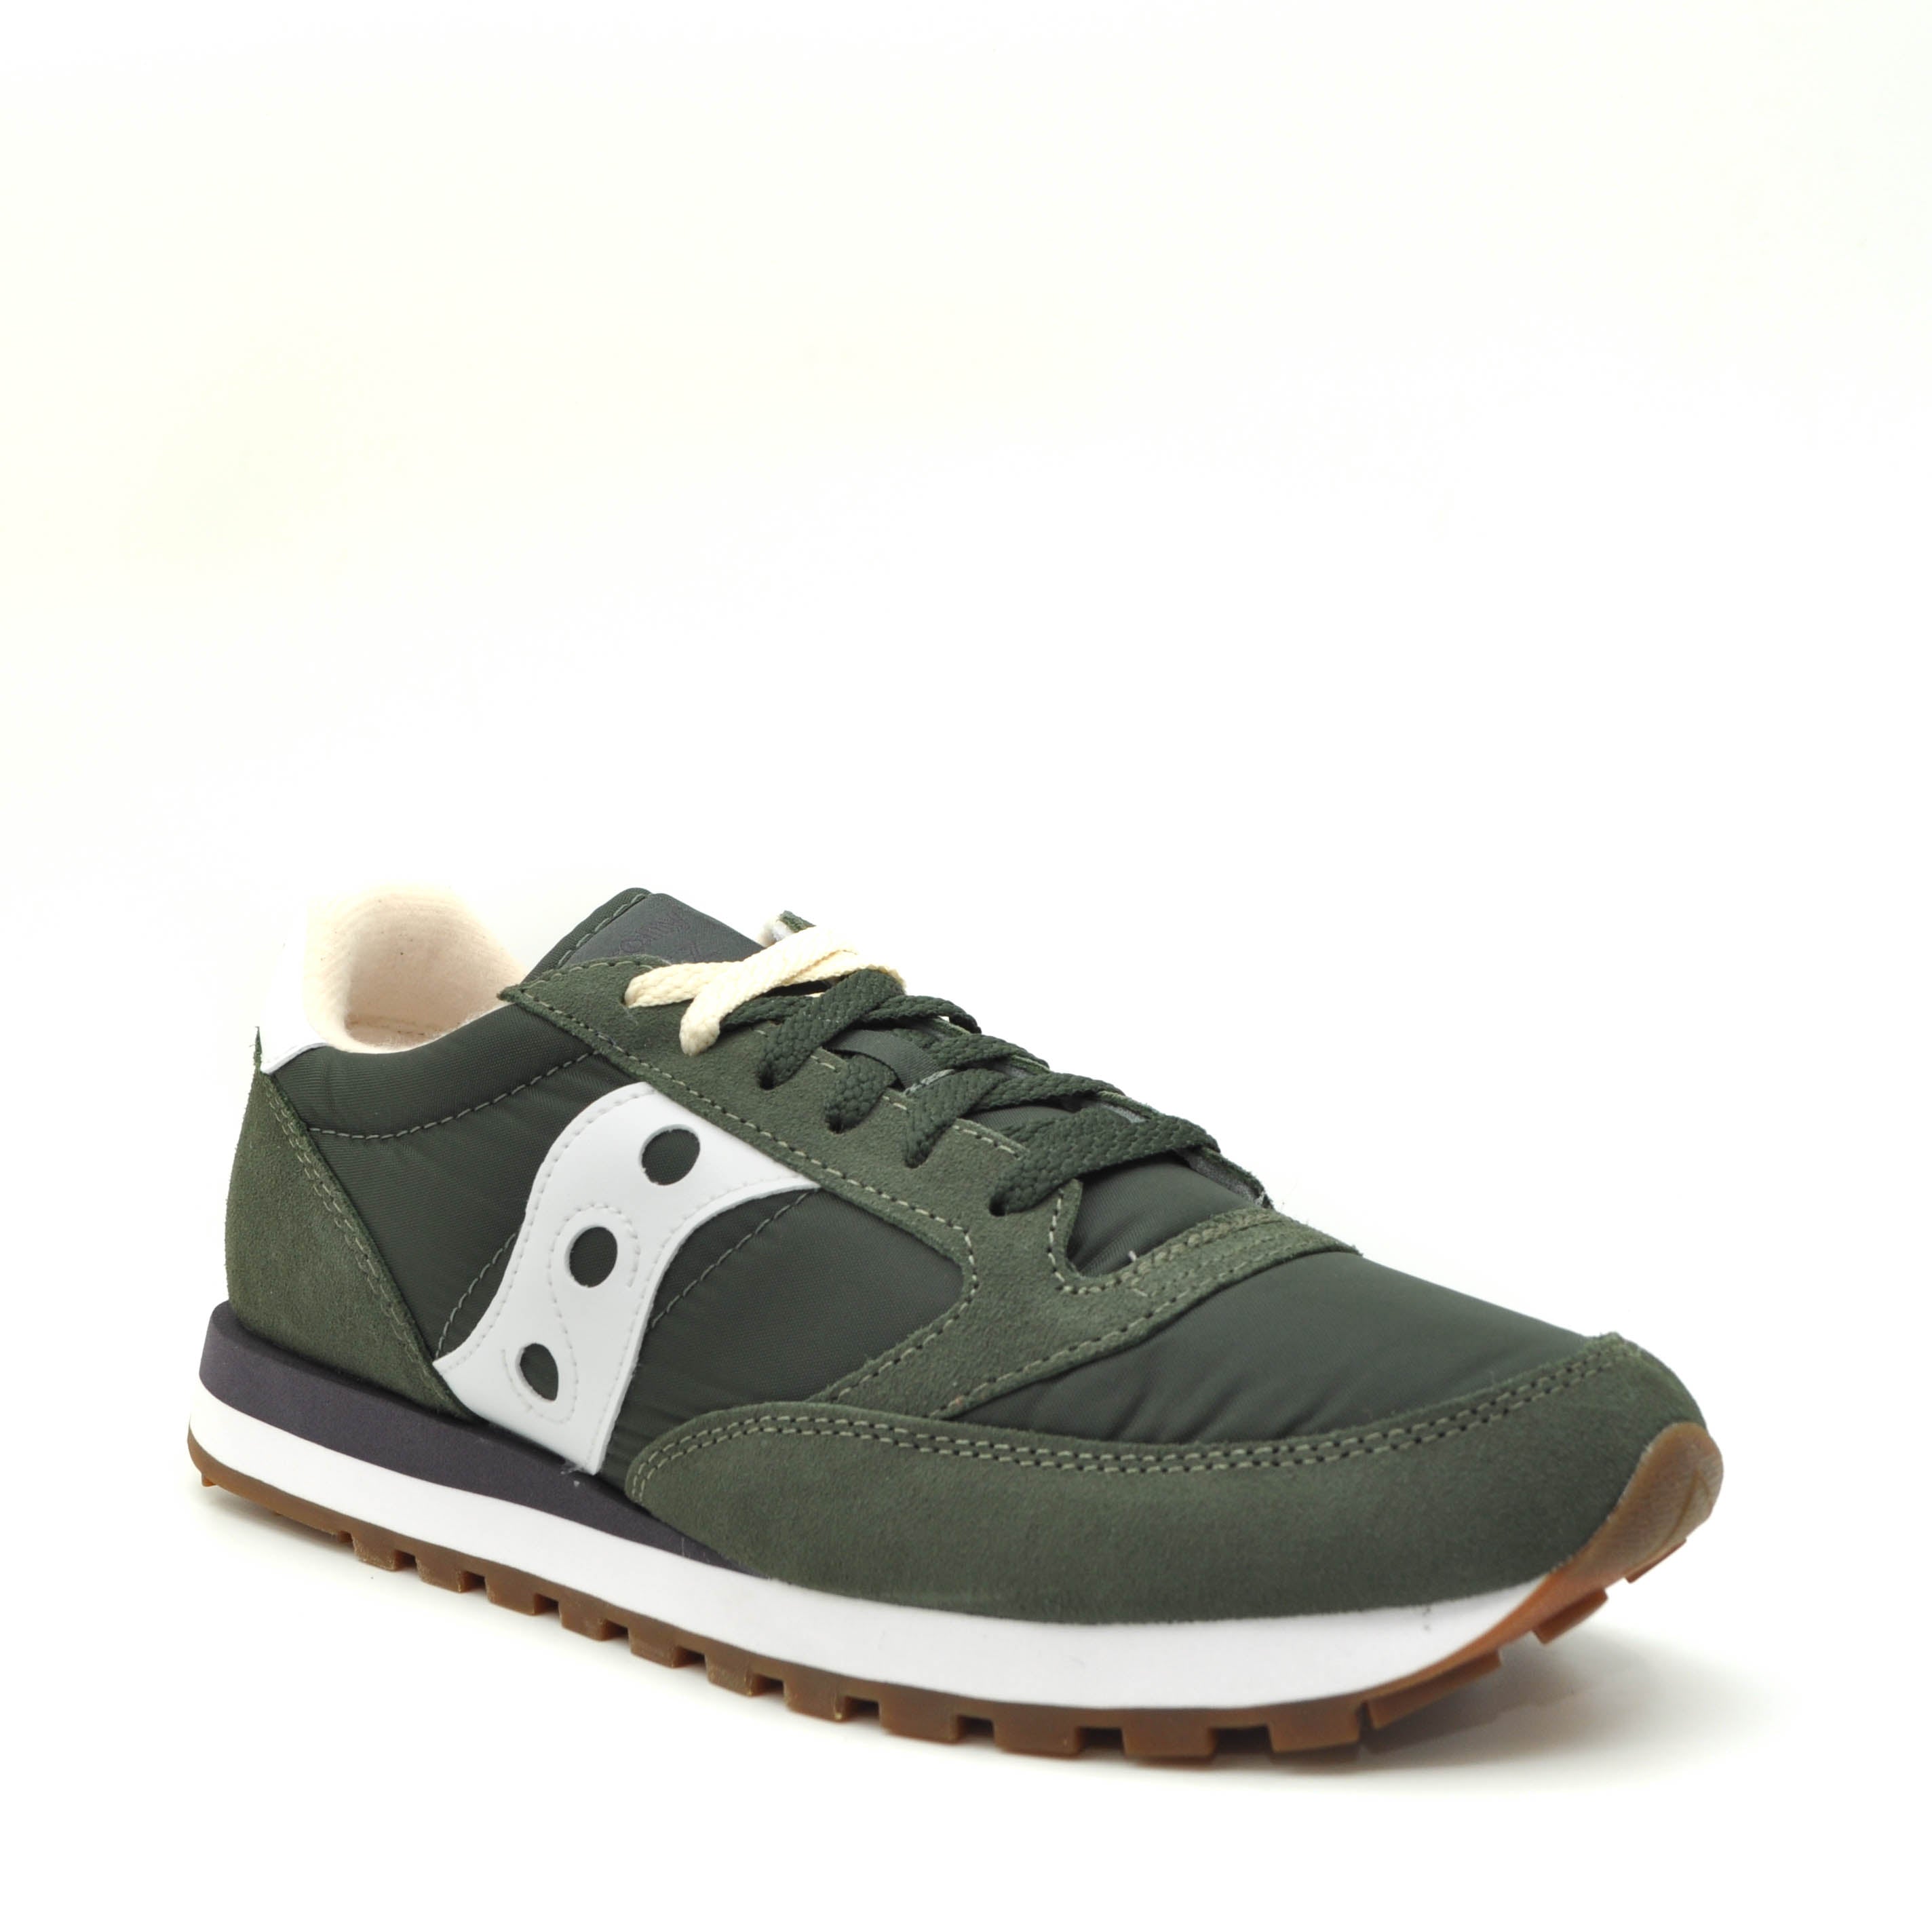 Saucony mens trainers